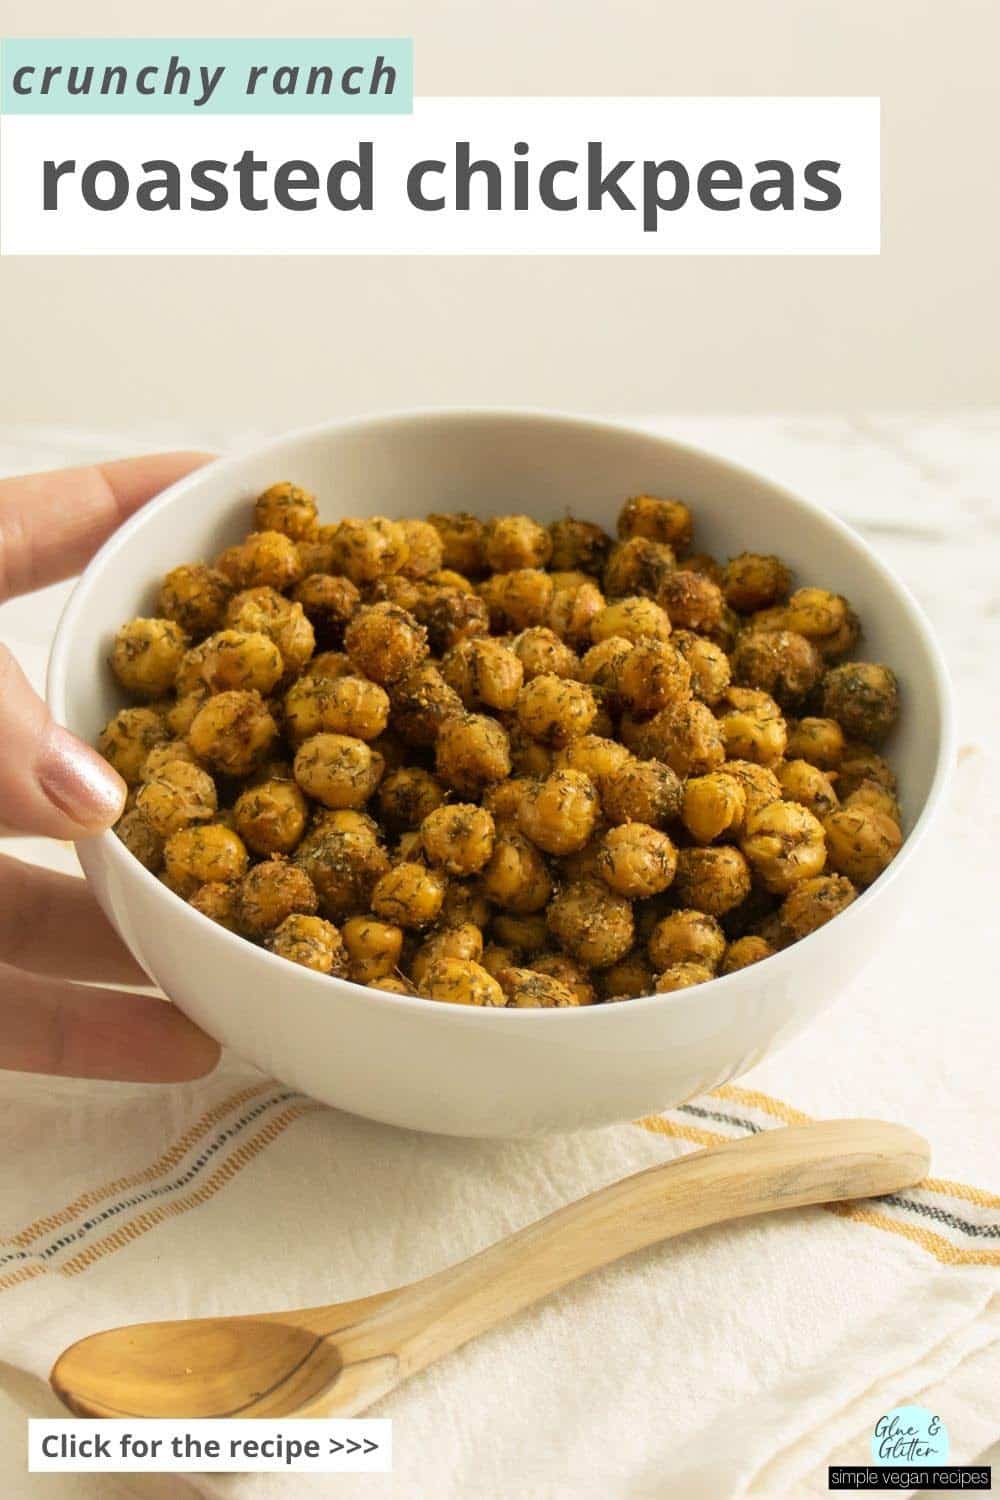 bowl full of crispy ranch roasted chickpeas, text overlay